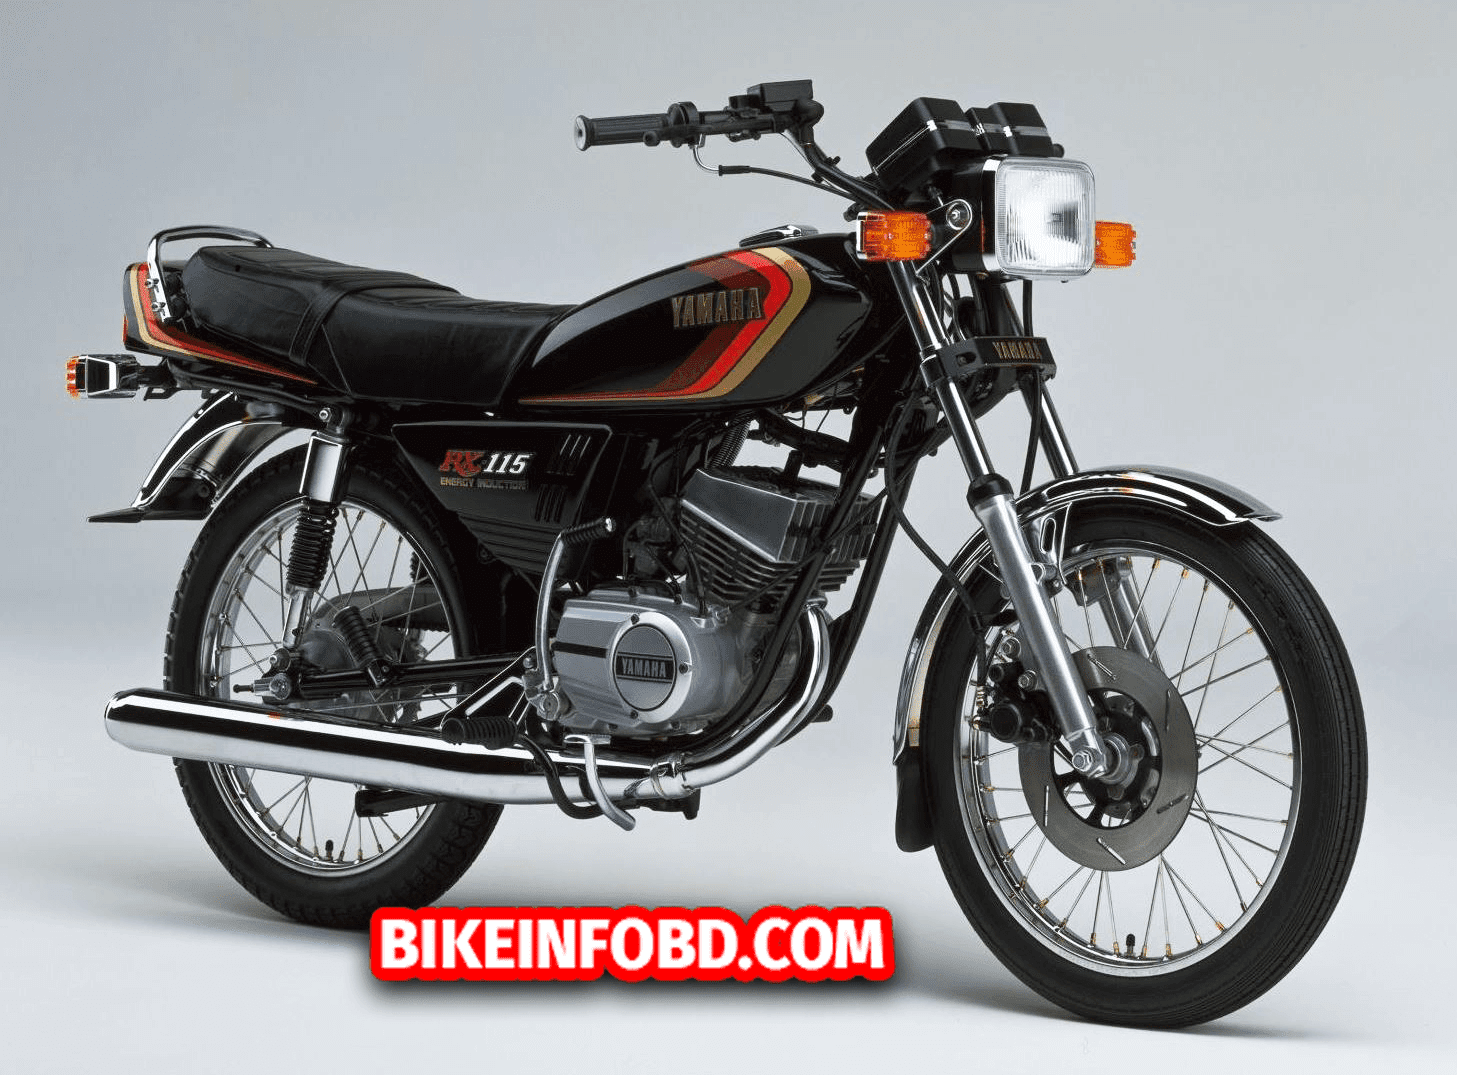 yamaha-rx-s-115-japan-specifications-review-top-speed-photos-mileage